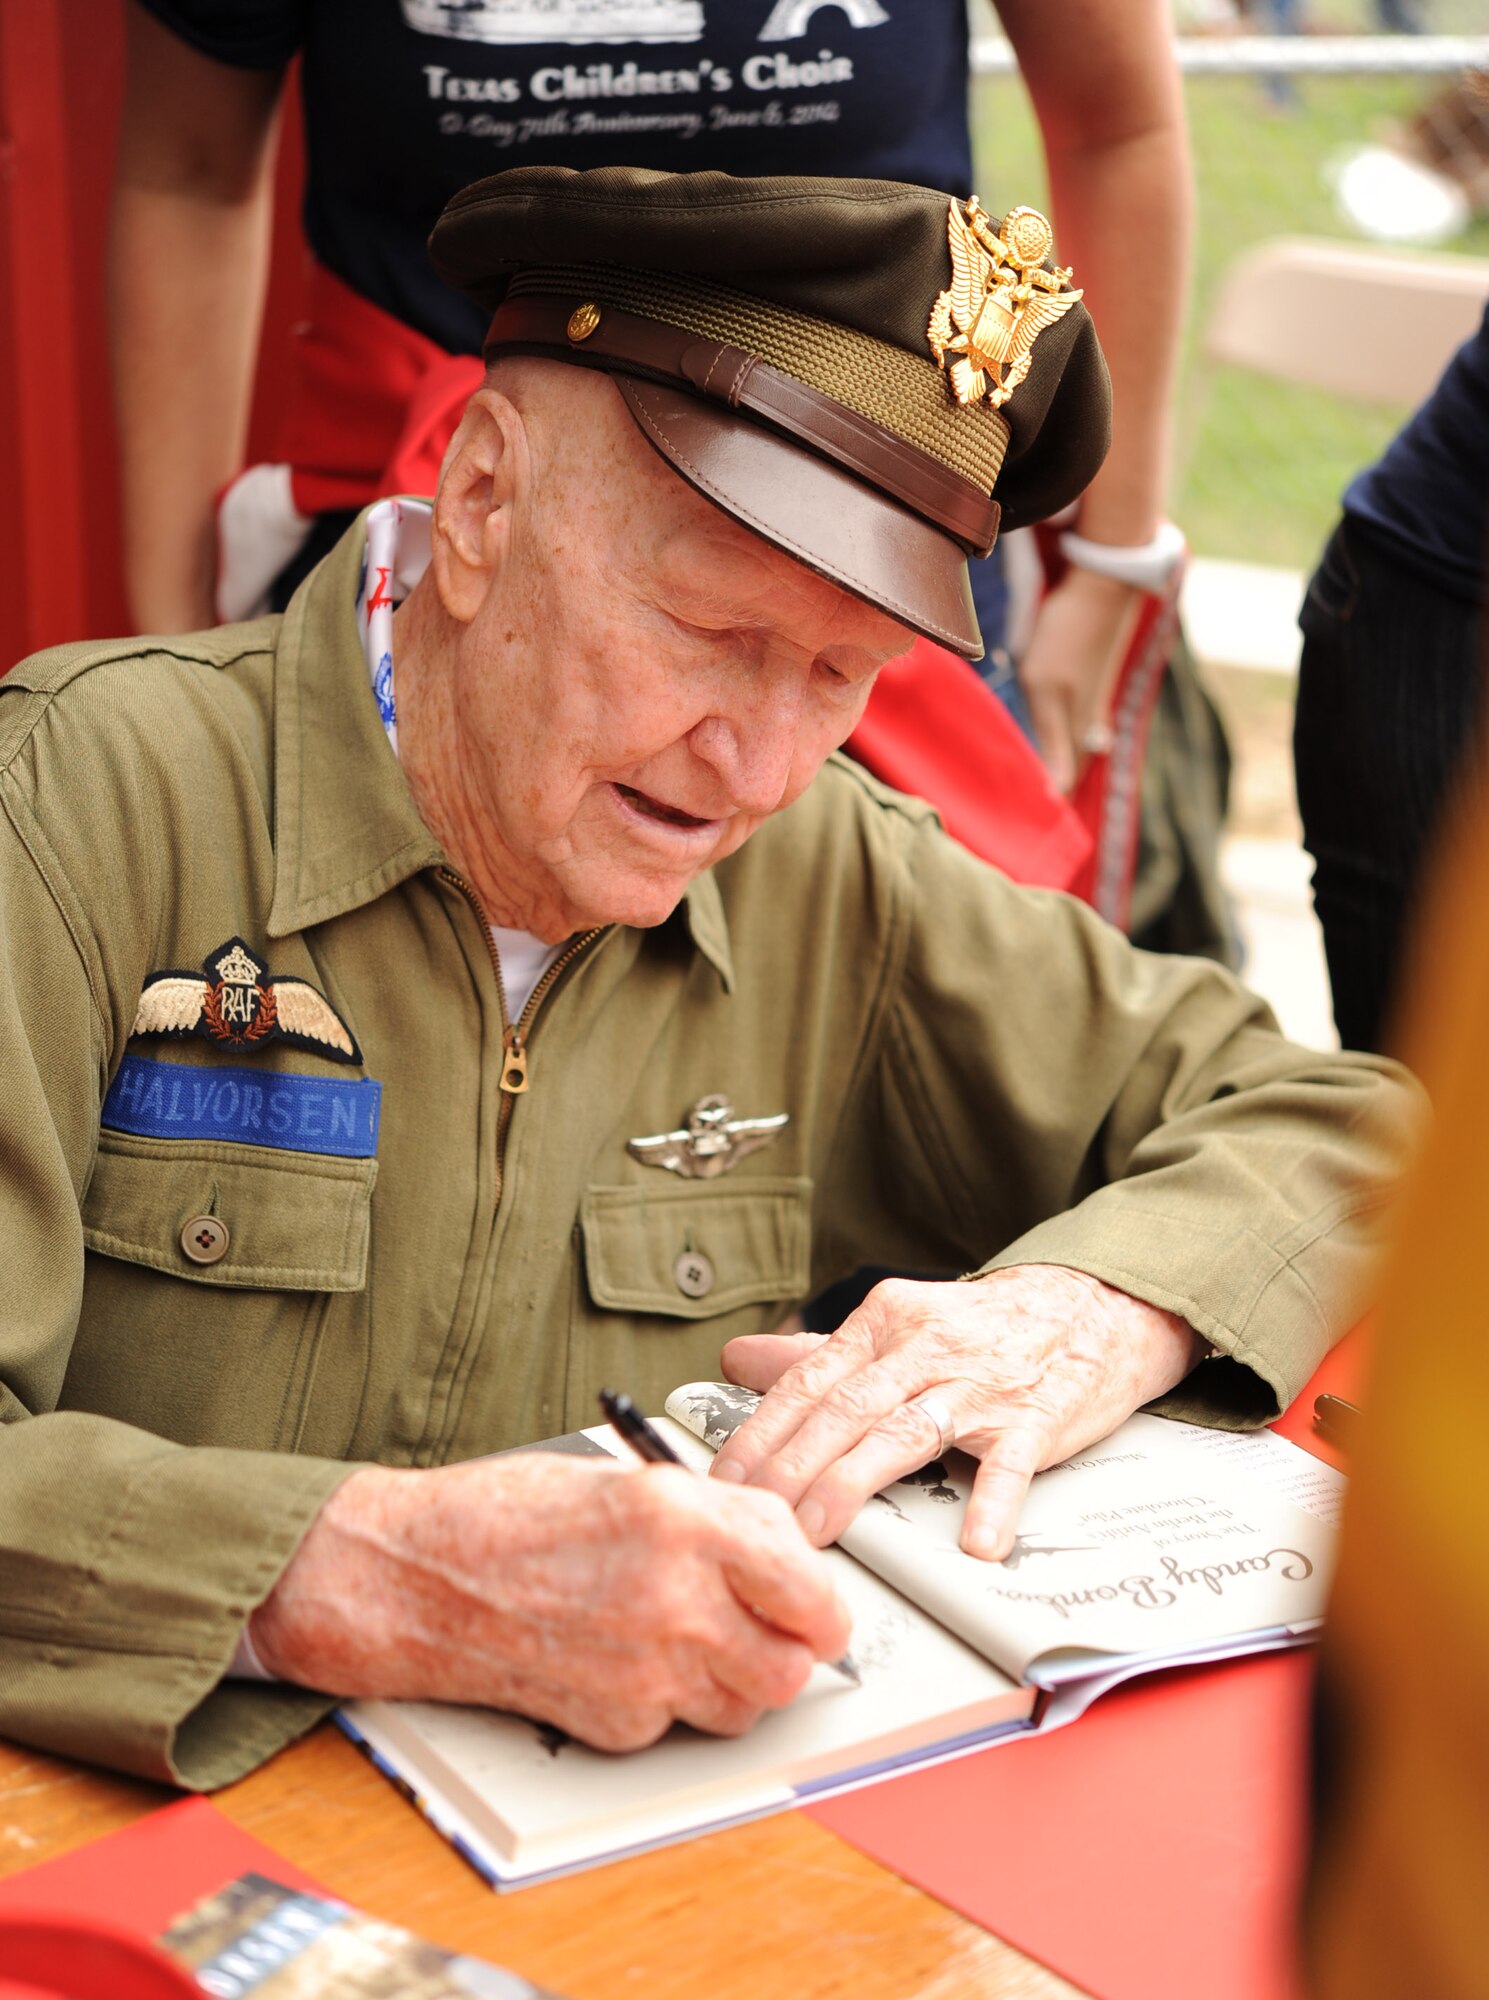 Retired Col. Gail Halvorsen signs autographs Nov. 9, 2013, at the South Texas Regional Airport, Hondo, Texas. Halvorsen participated in a re-enactment of Operation Little Vittles that took place during the Berlin Airlift, following World War II. Halvorsen and his crew dropped about 2,000 candy bars from a vintage C-47 Skytrain during the event. 